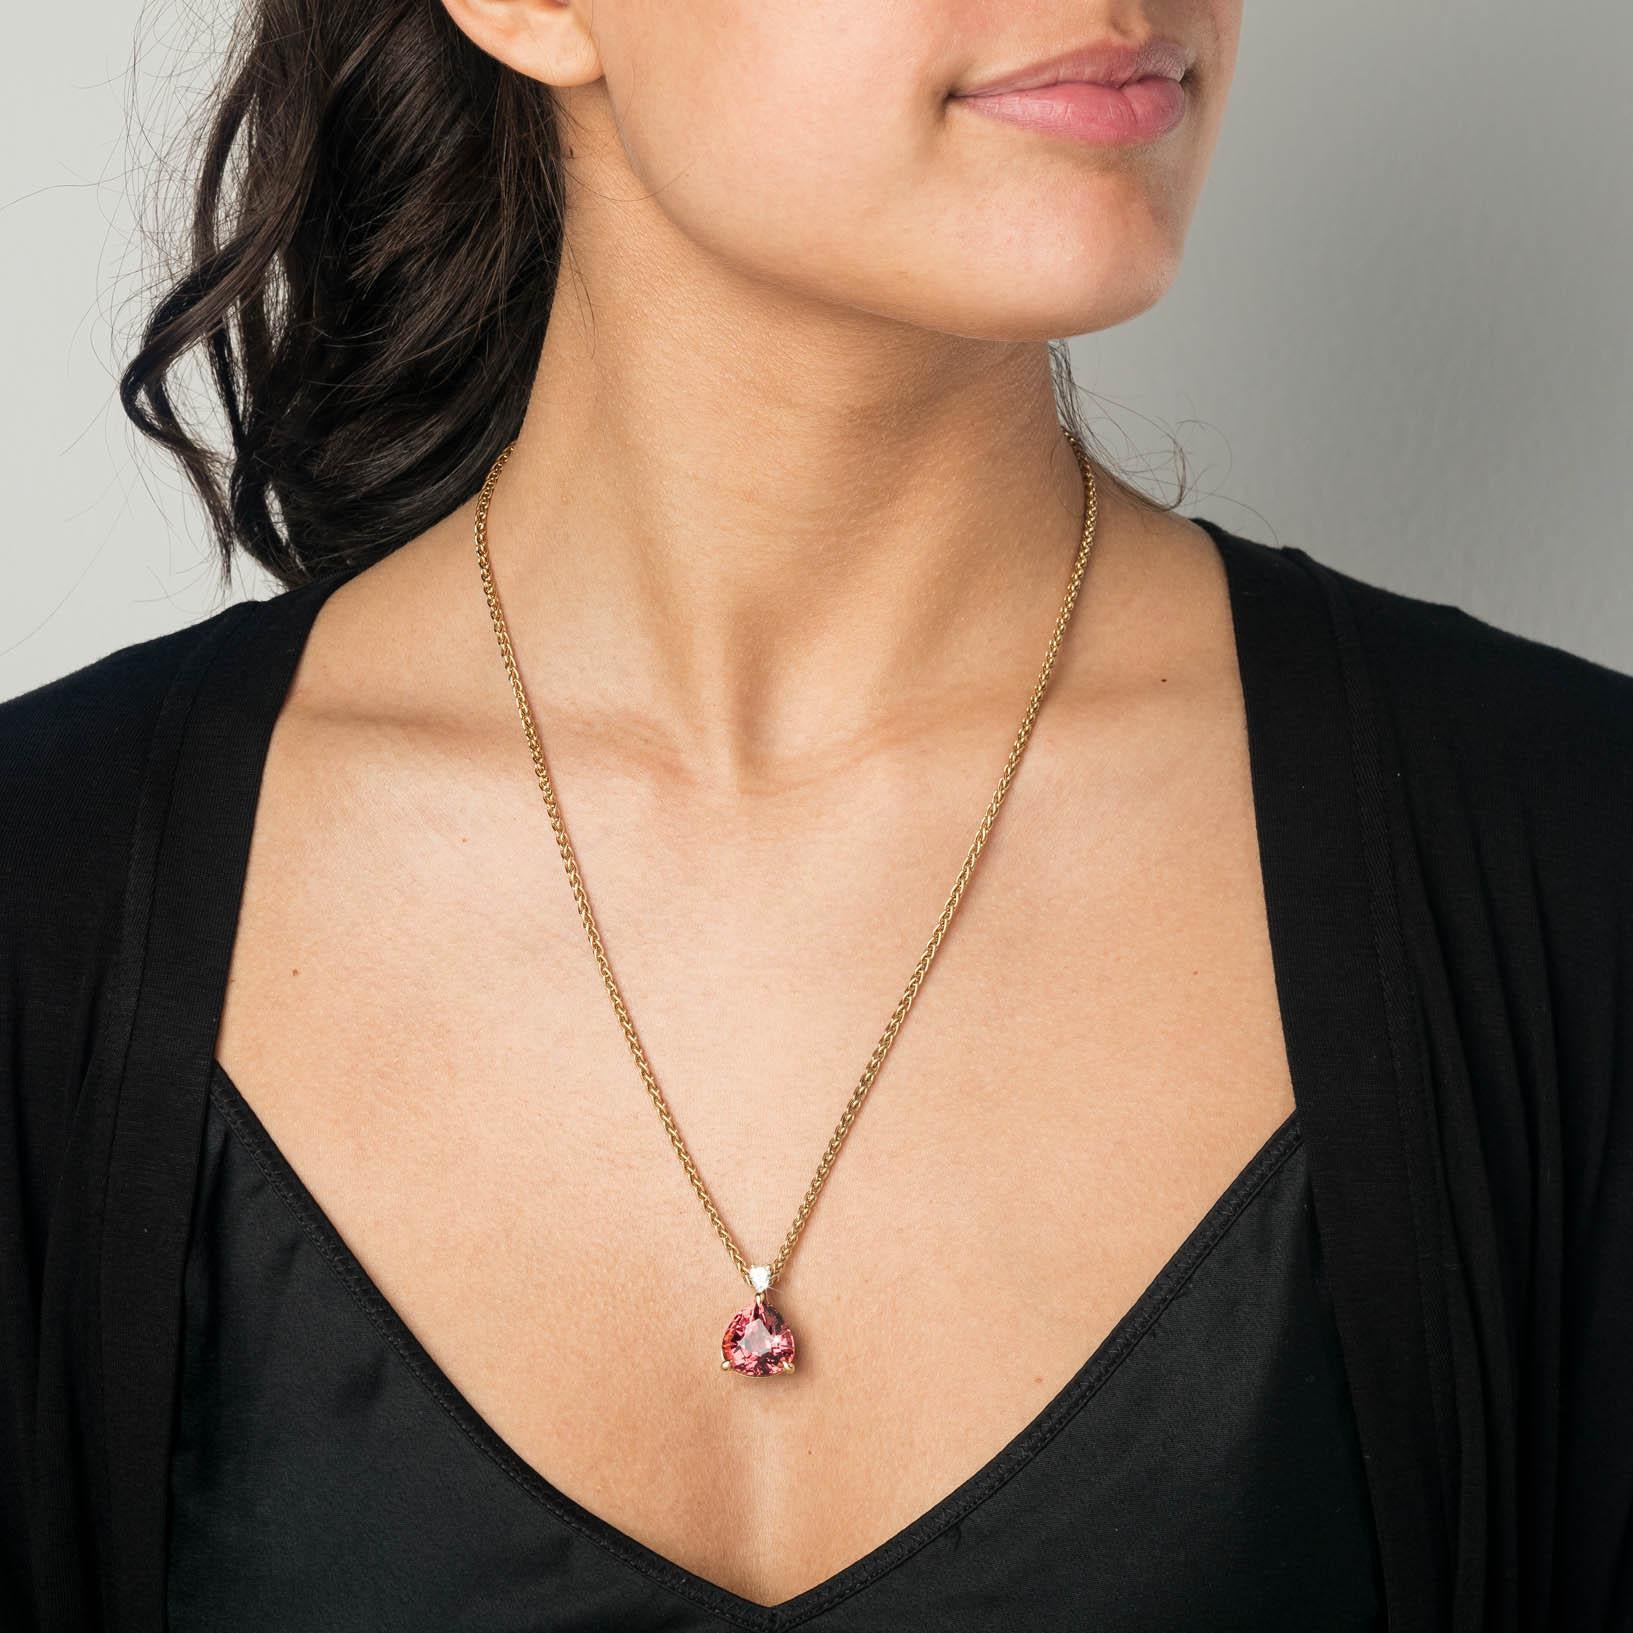 This is a 18 Carat yellow gold pendant with a Tourmaline and Diamonds. The pendant is made with a unique pure pink 14 Carat pear-cut Tourmaline, combined with a big claw setting and refined band with 22 pavé Diamonds. In the opposite direction, a